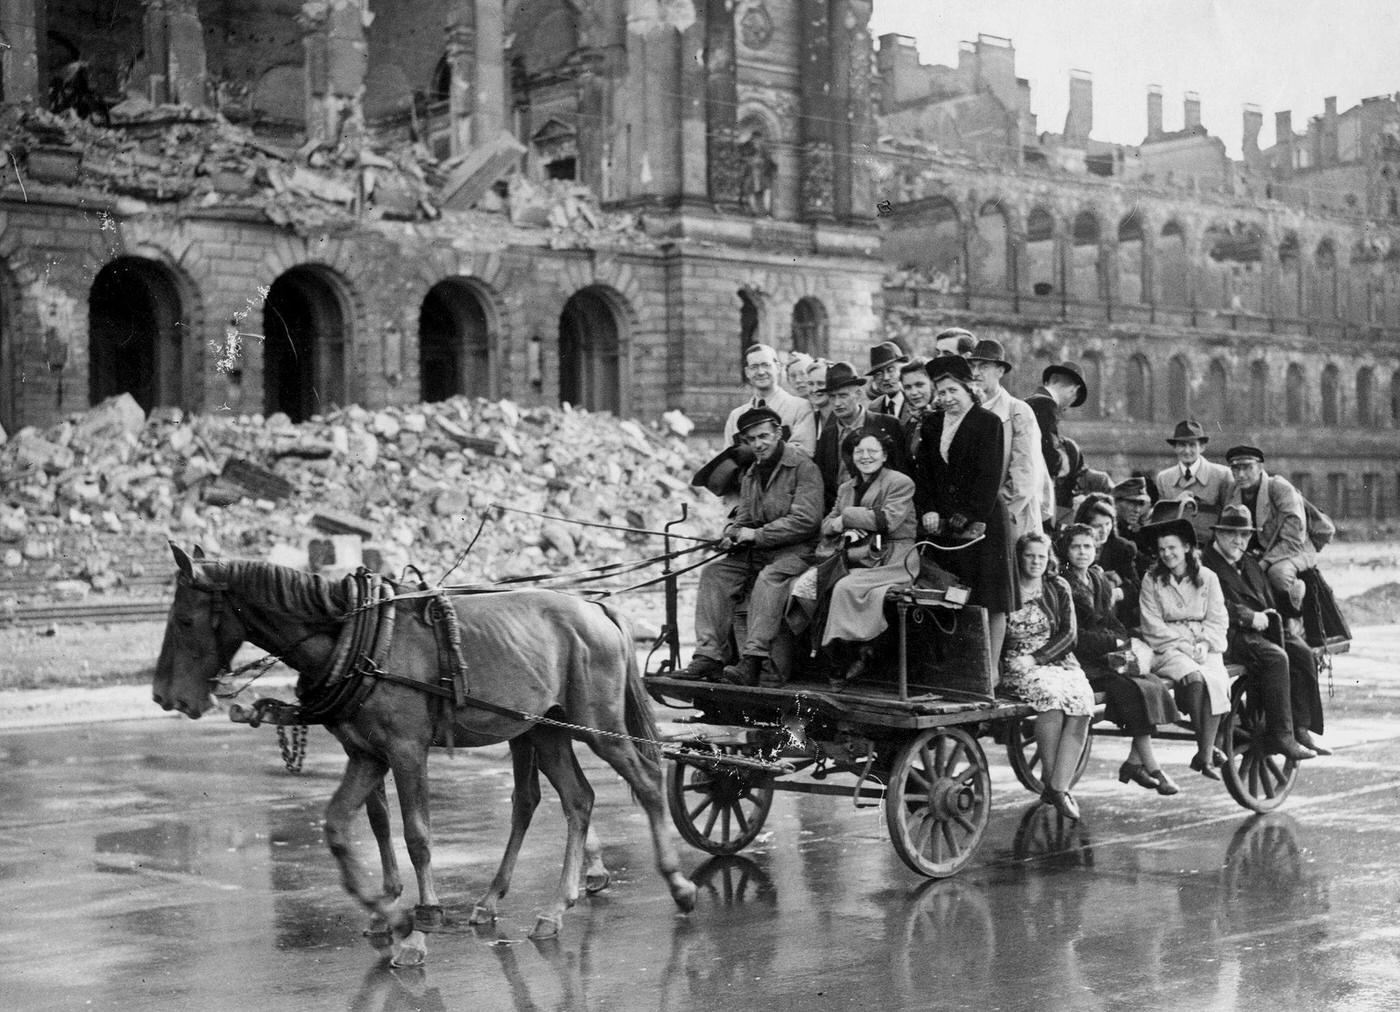 British army units arrive in Berlin to take up their occupation positions in the Allied Zone, July 1945.